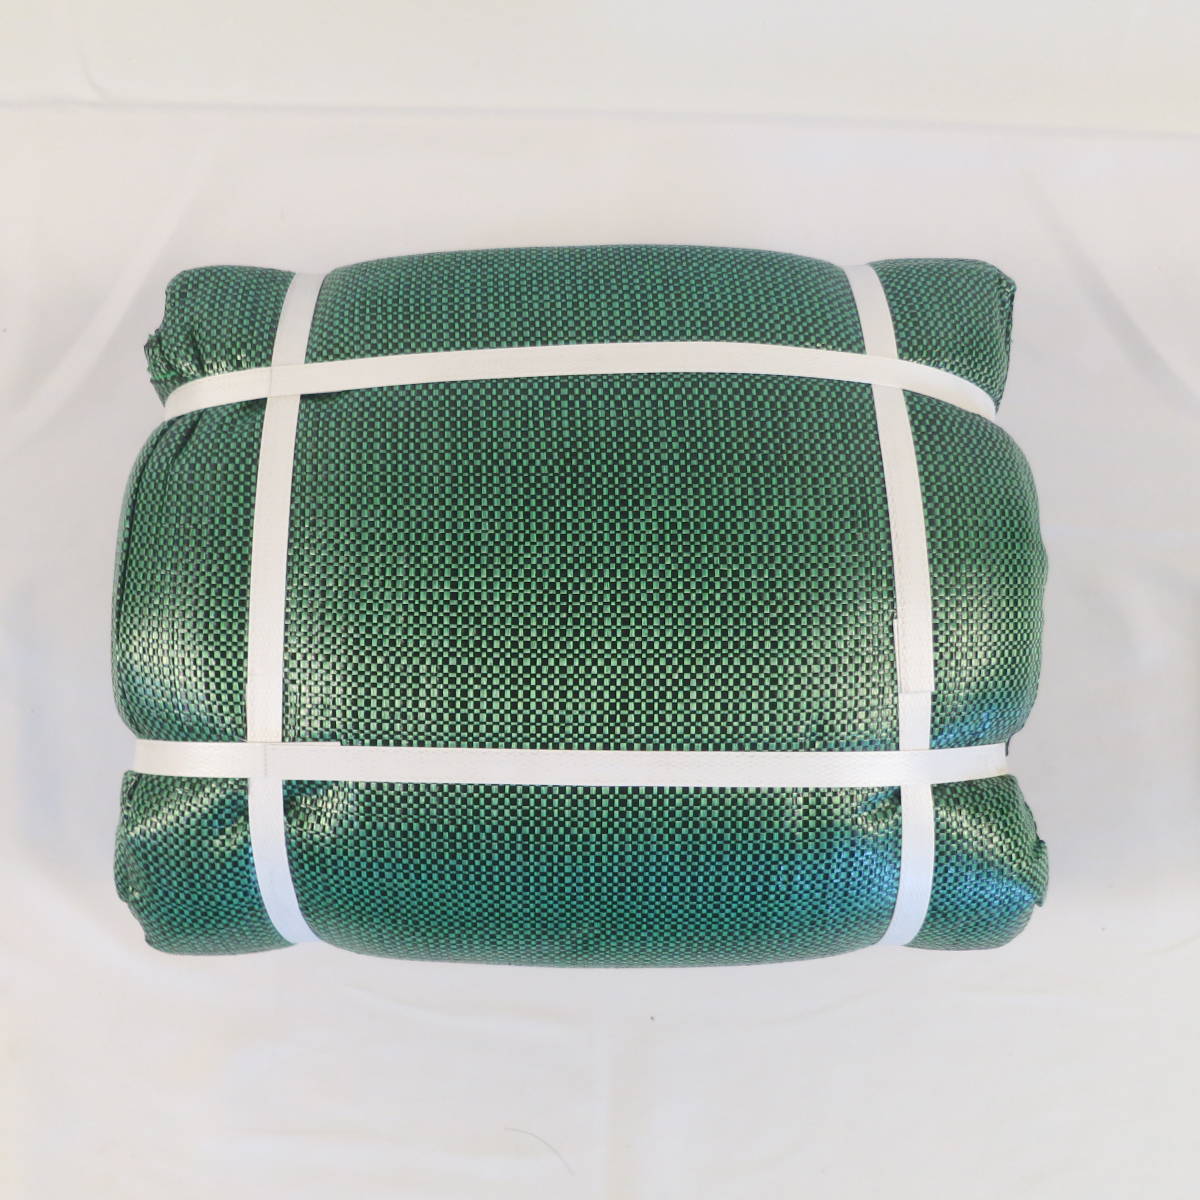  weed proofing seat 3m×20m 1 pcs green color 